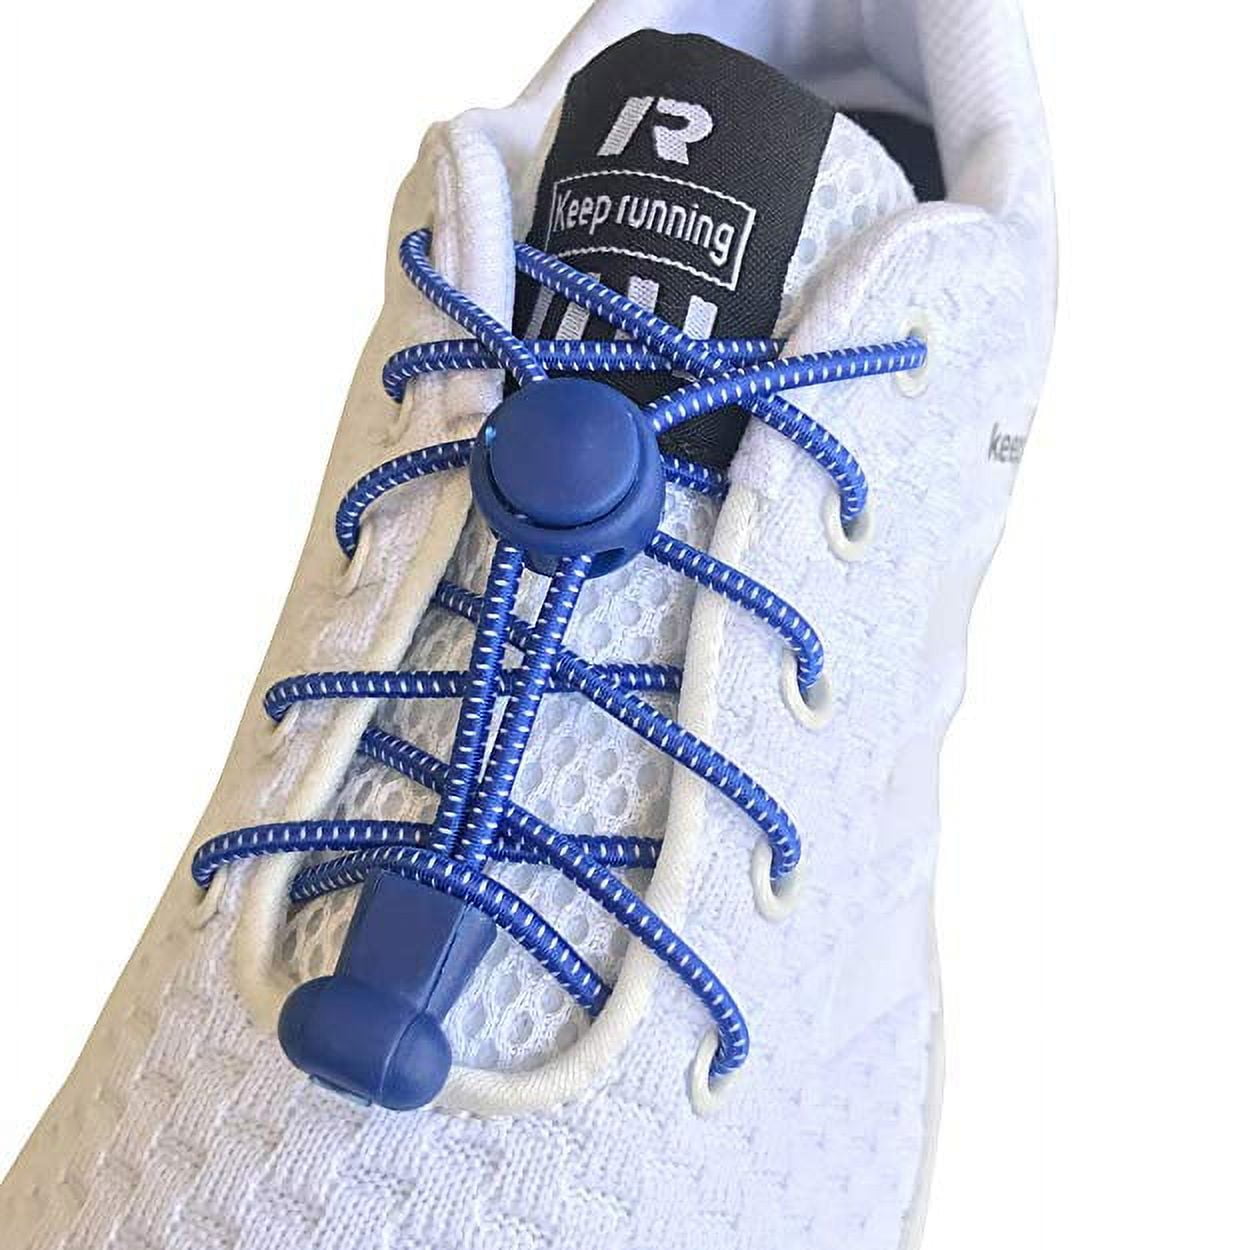 Buy BOOMLACES No Tie Shoelace Locks Elastic Shoe Lace for Men Women Adults  Kids Sneakers Boots Dress Shoes Ties No-tie Laces Shoelaces System Lock for  Running Hiking Marathon Triathlon Athletic & more